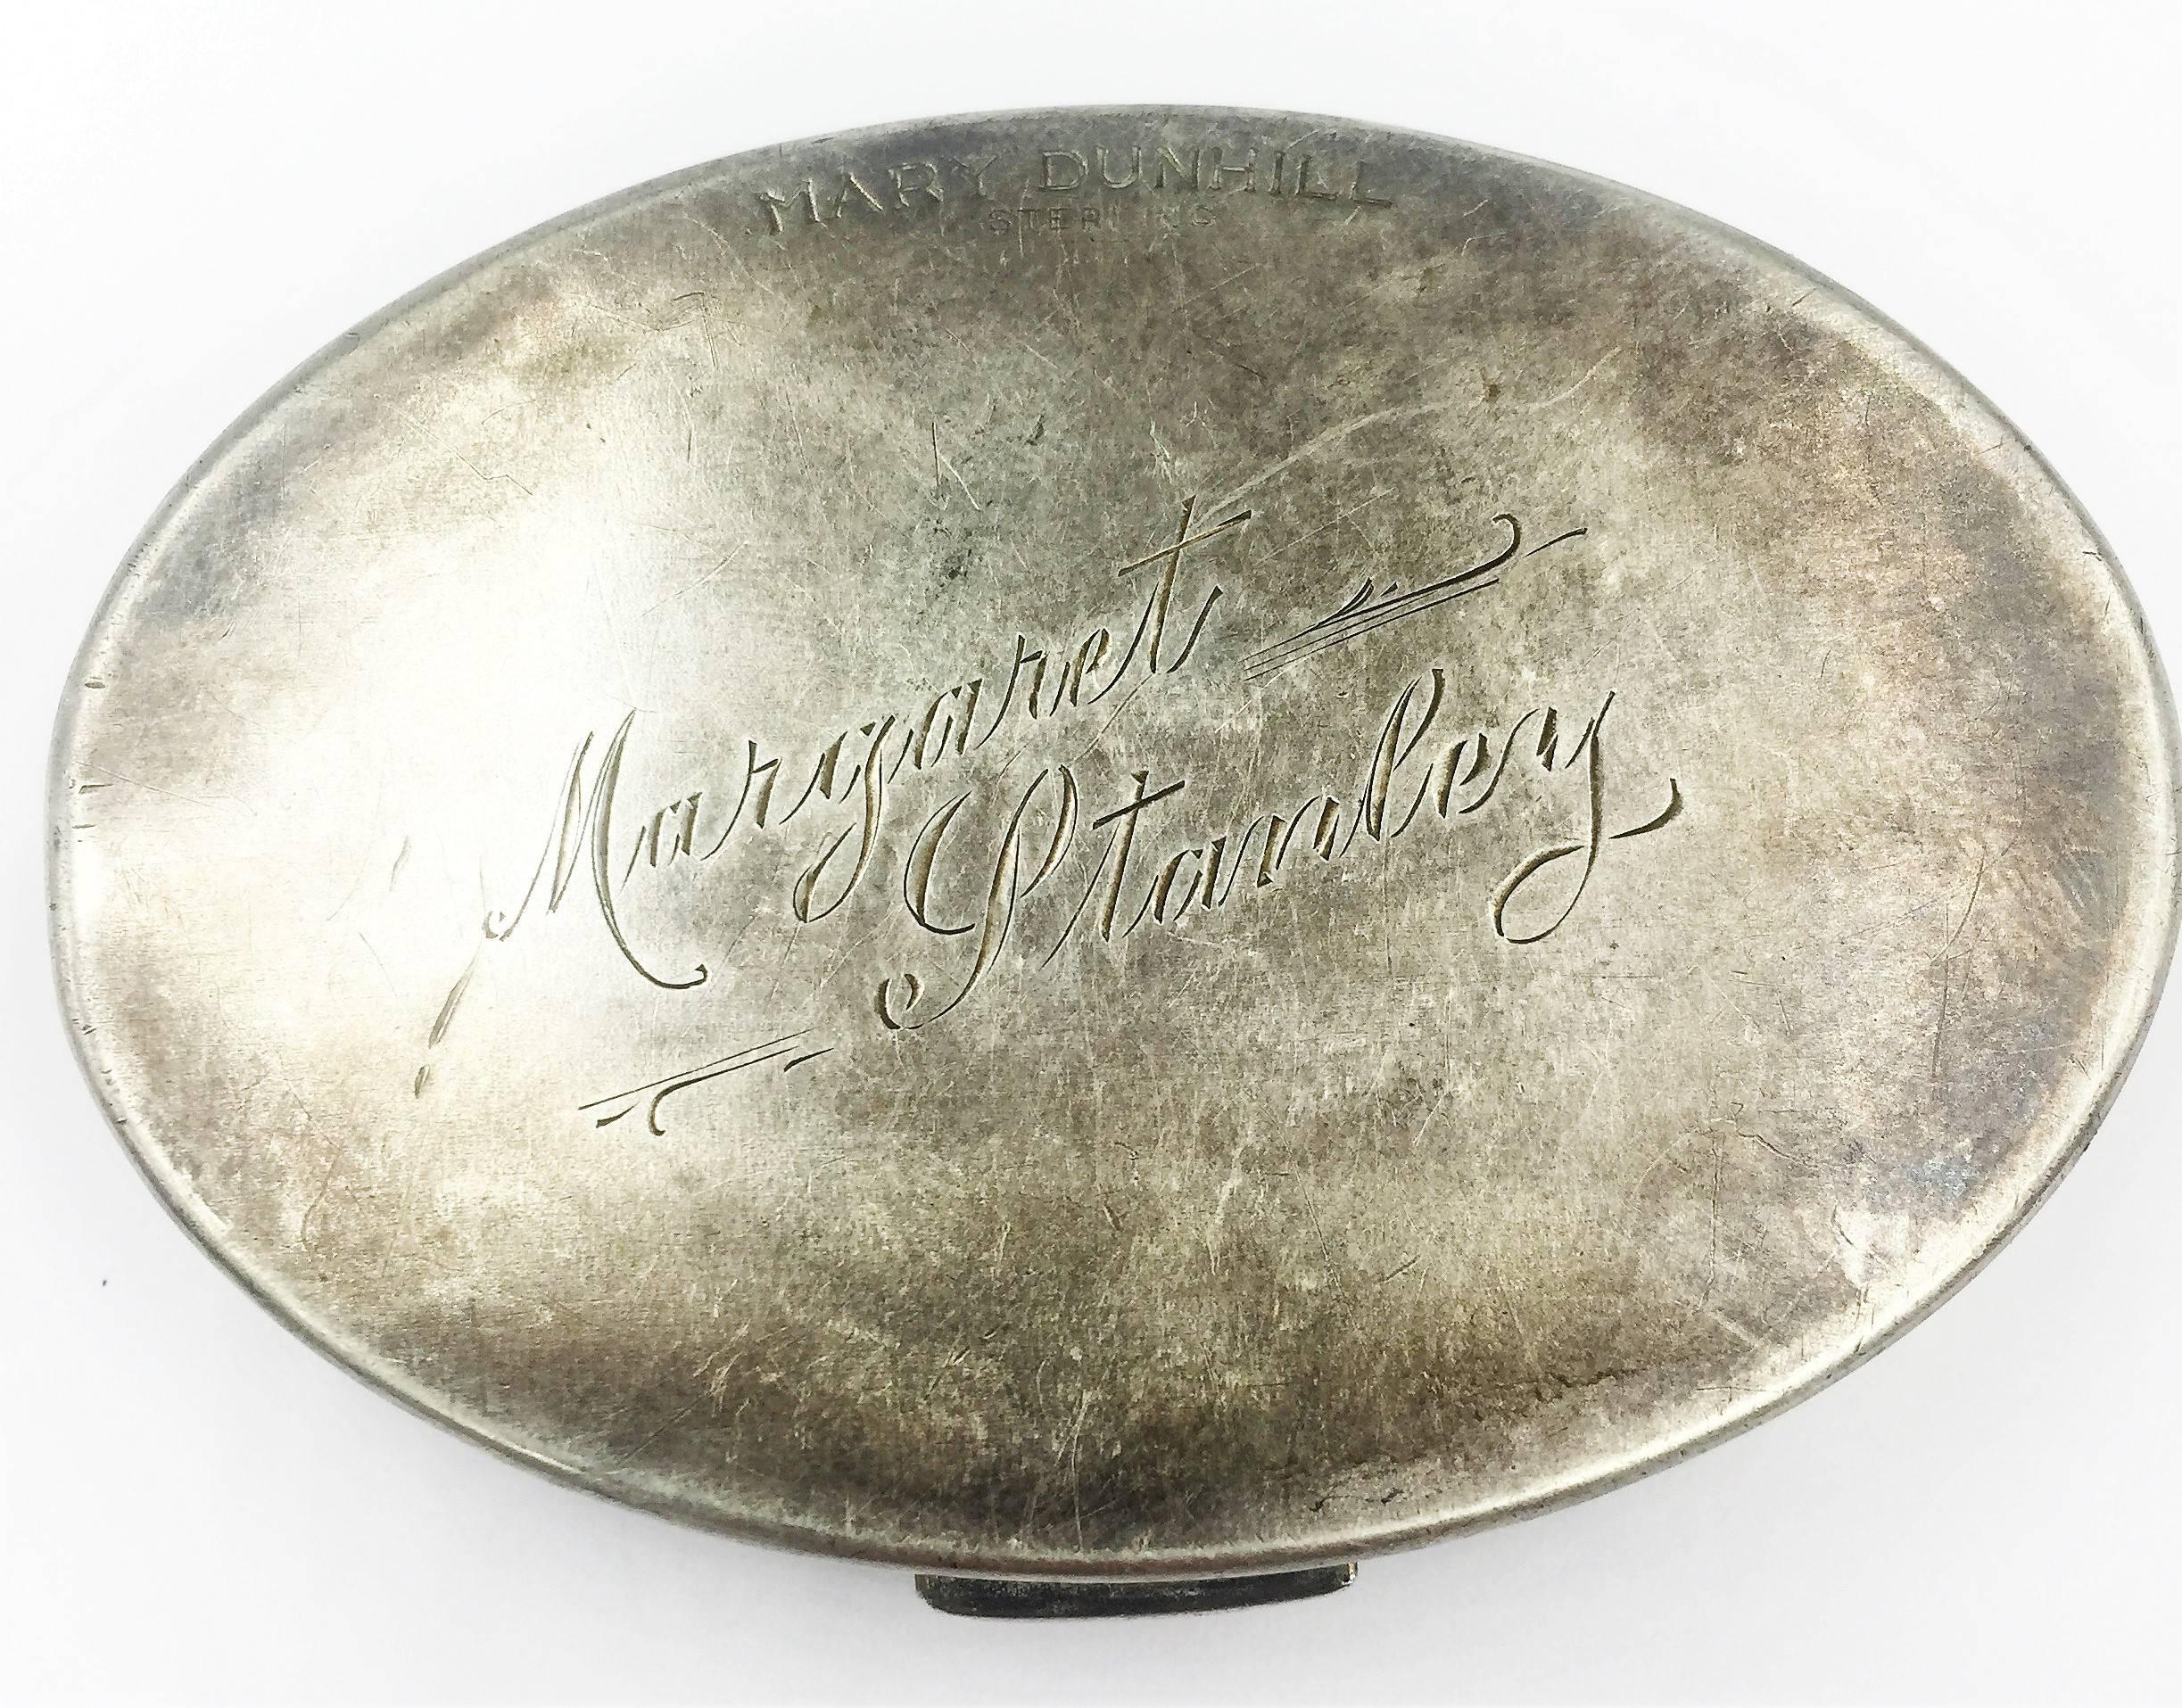 This Historical Signed Mary Dunhill World War II American Red Cross Volunteer Make Up Compact Is Absolutely Fascinating! Capture a piece of history and true American pride and courage of the women that were awarded these make up compacts for there